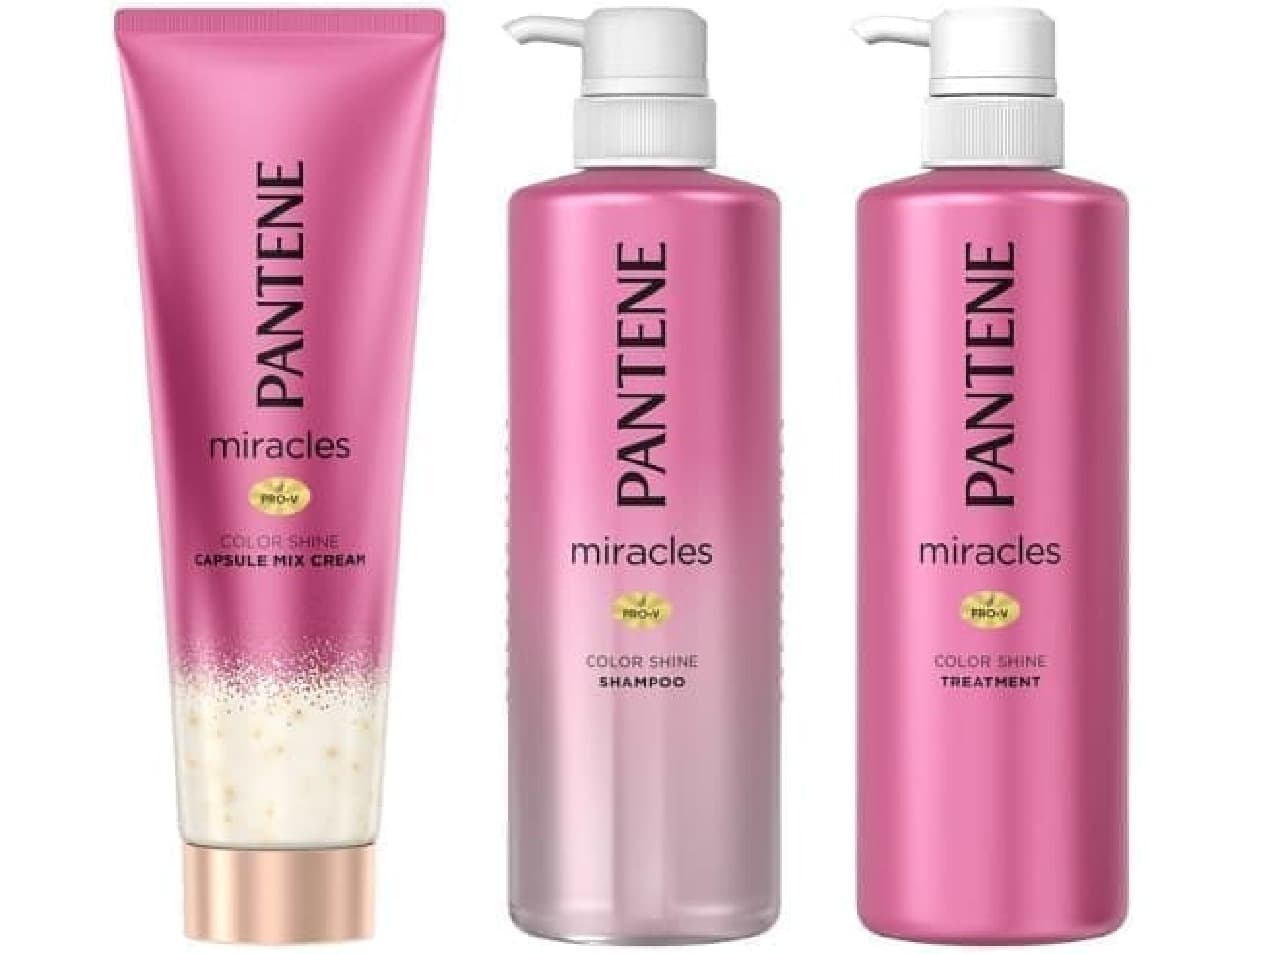 Pantene Miracles "Discoloration Prevention Series"